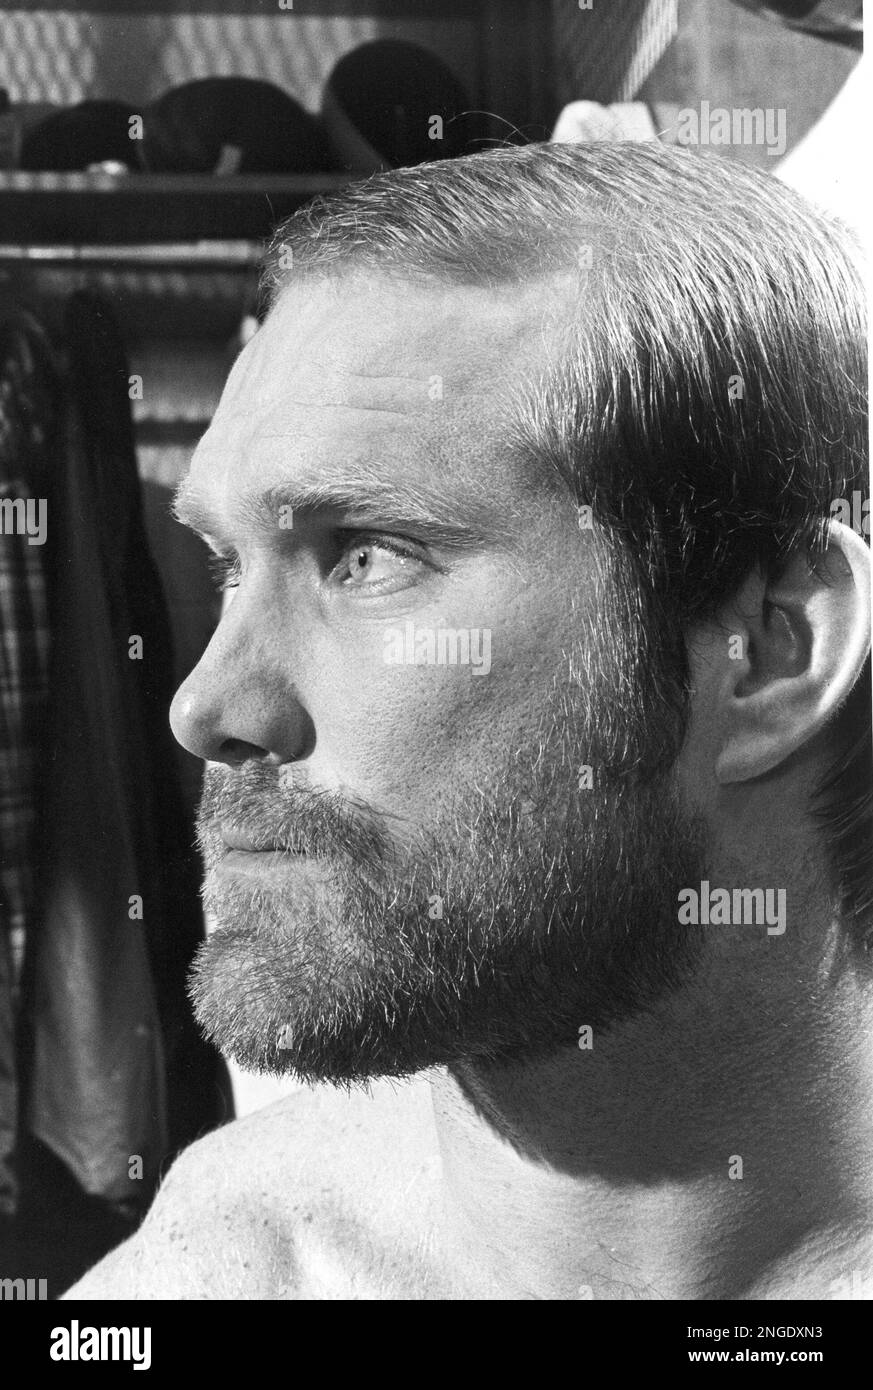 Pittsburgh Steelers quarterback Terry Bradshaw is shown with a beard in ...